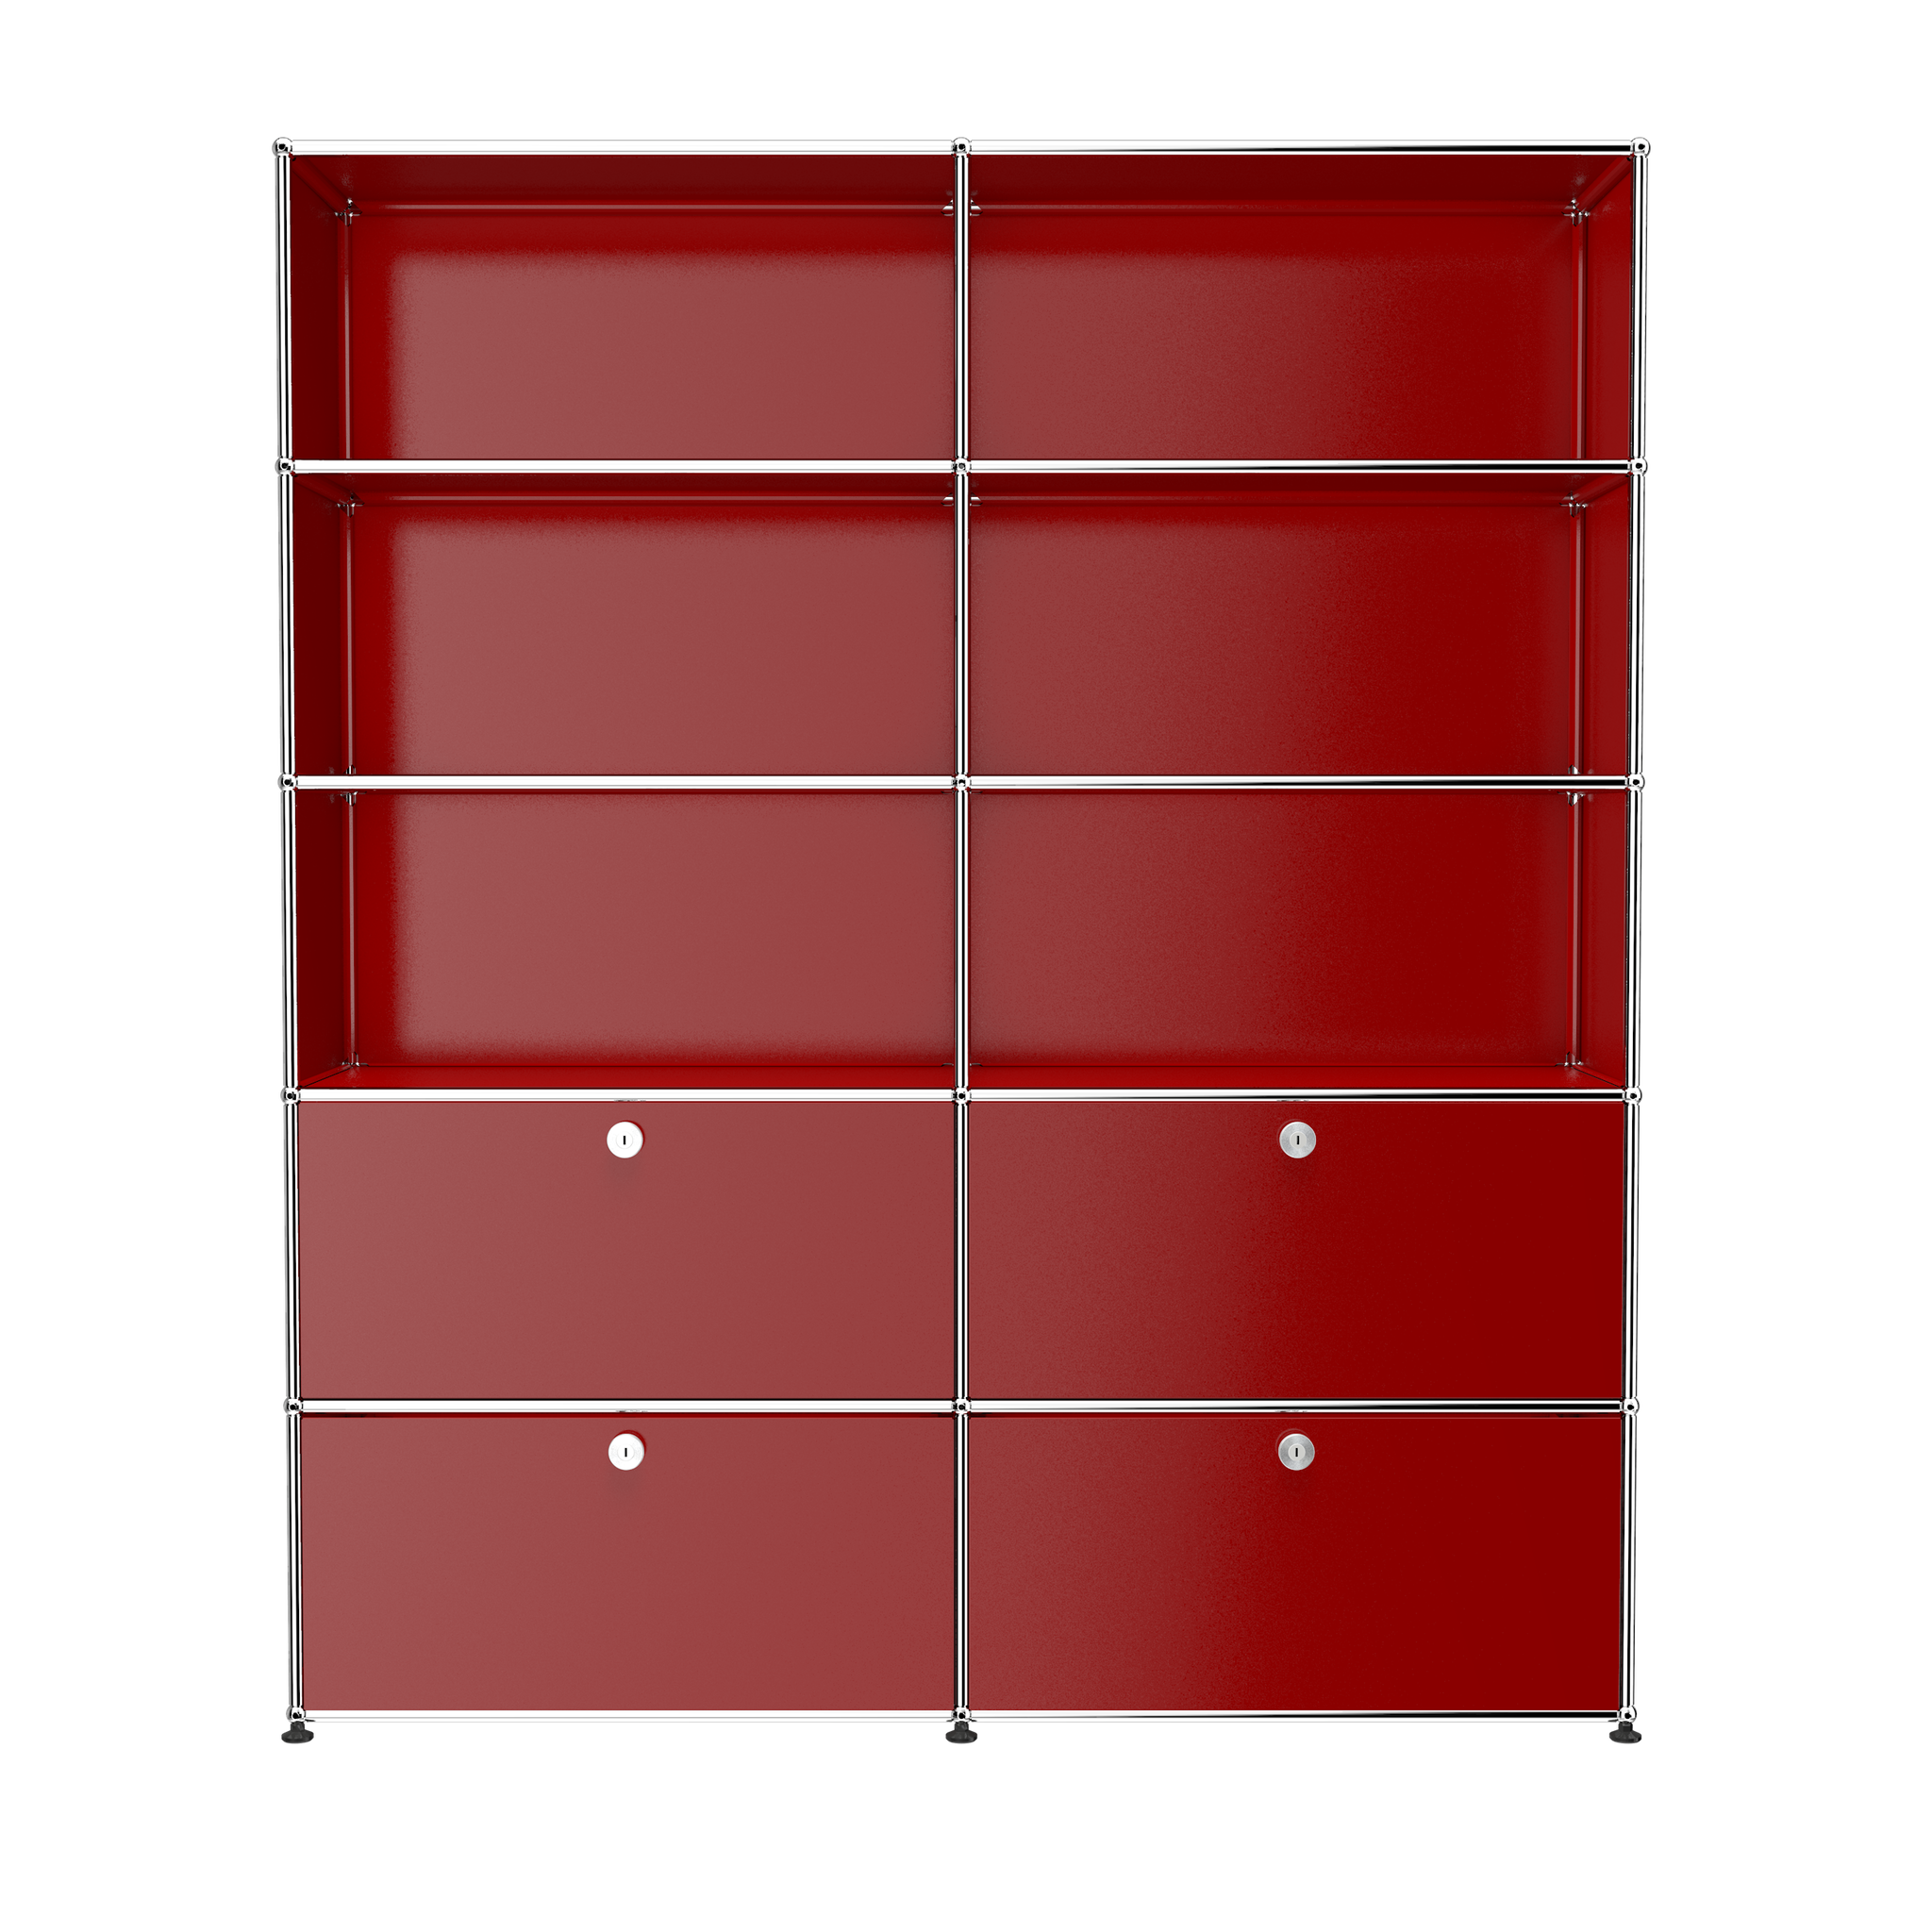 USM Haller Large Contemporary Shelving with Storage (R2) in Ruby Red